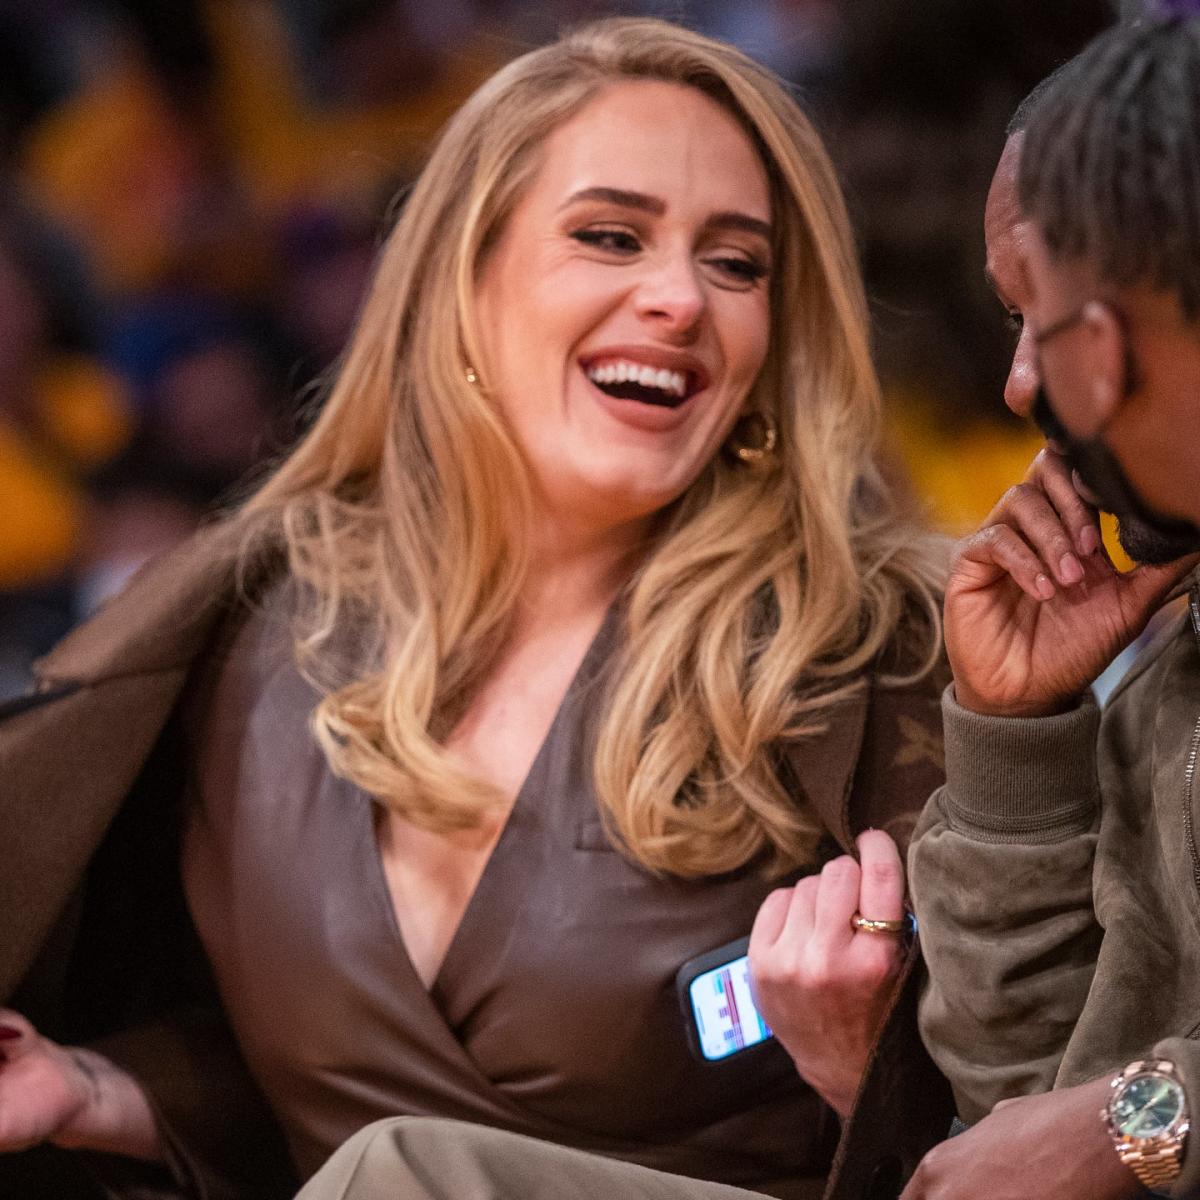 Adele and Rich Paul Dress Comfy for Date Night at Lakers Game